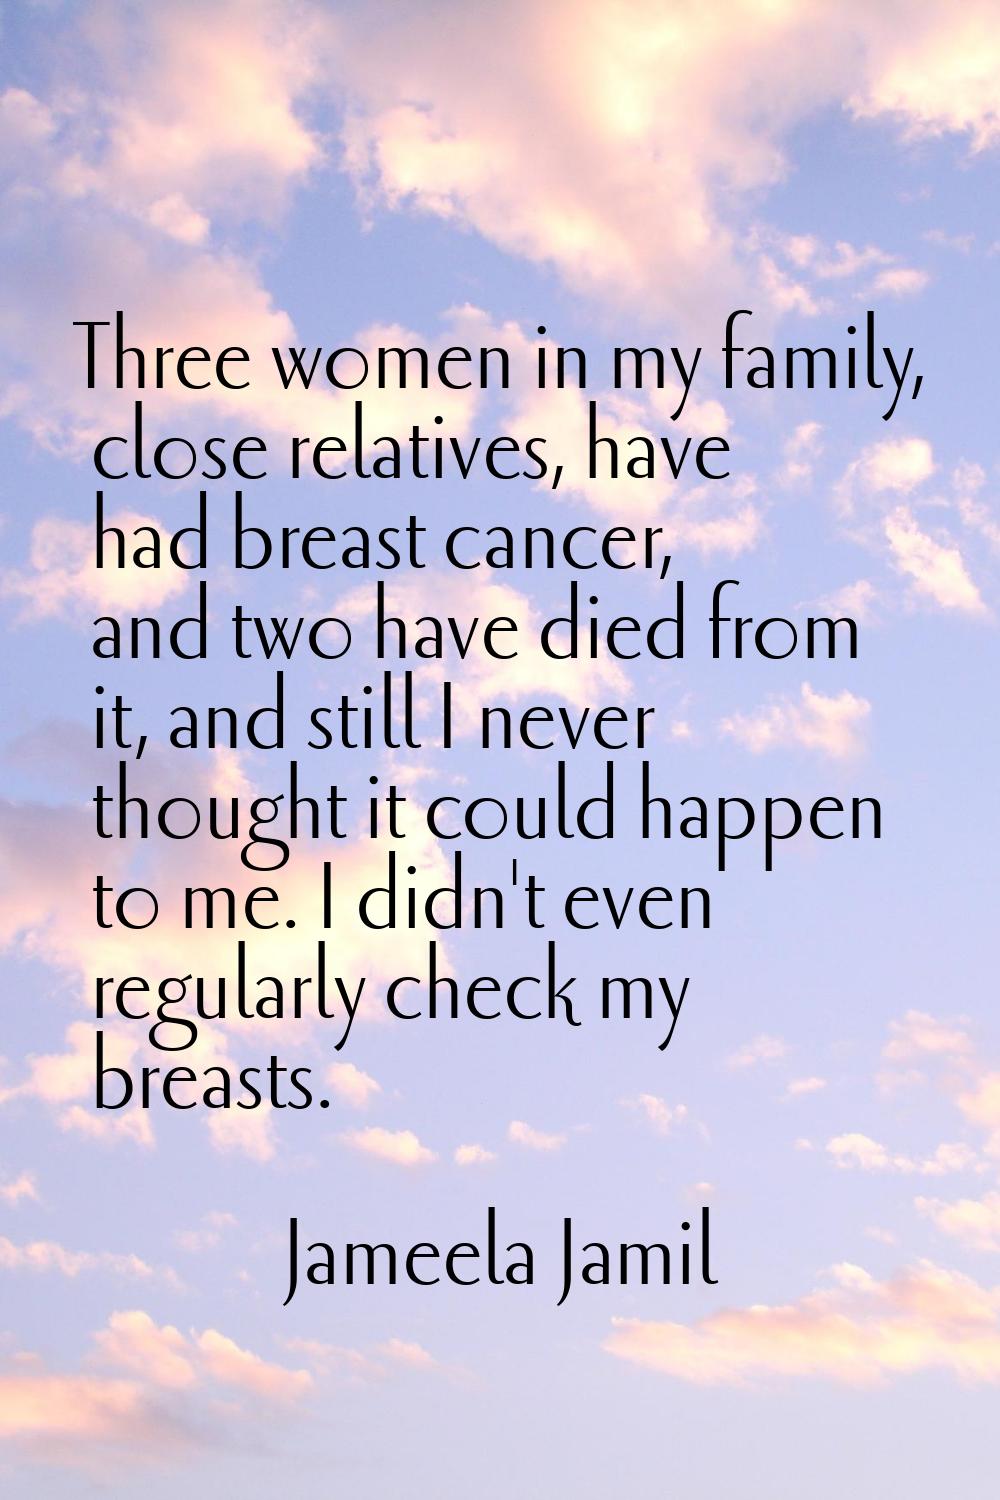 Three women in my family, close relatives, have had breast cancer, and two have died from it, and s